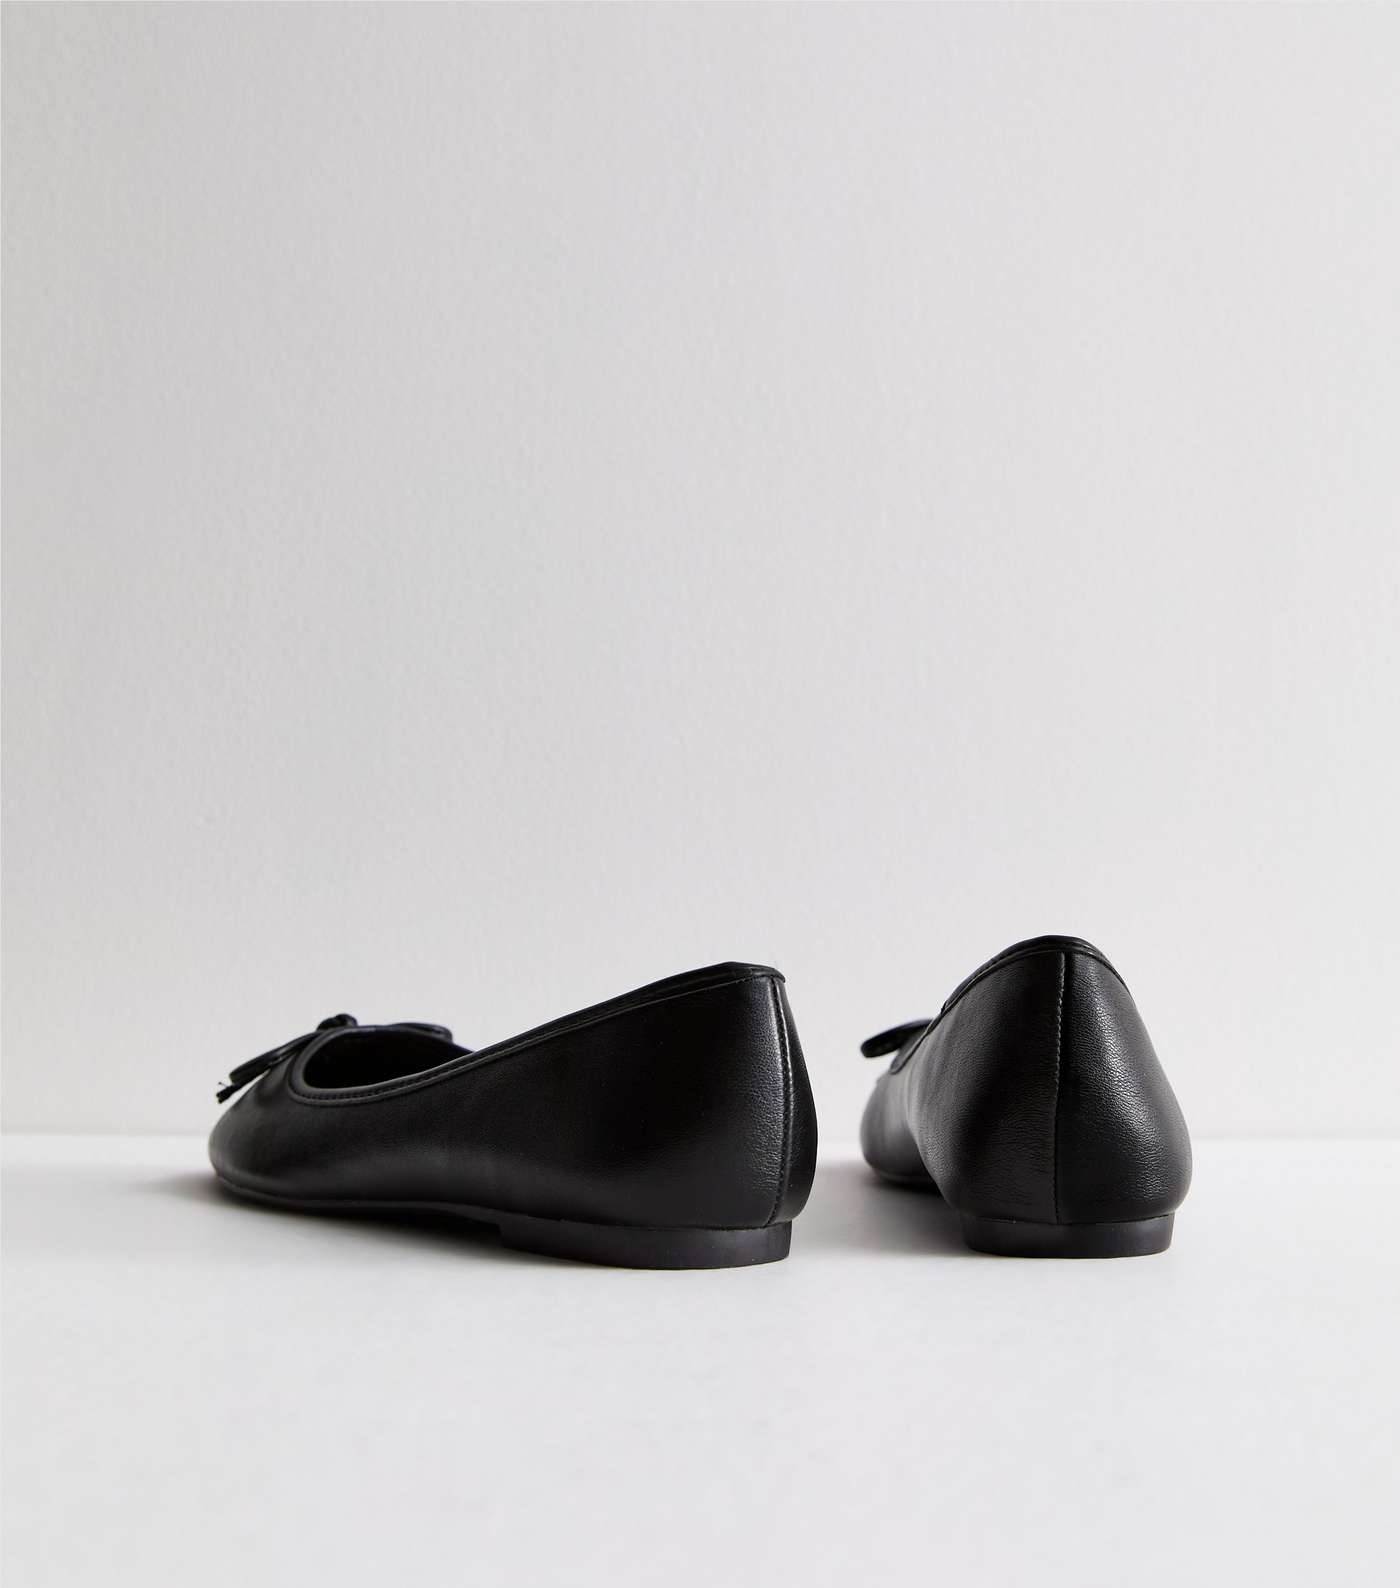 Truffle Black Leather-Look Bow Ballerina Pumps Image 4